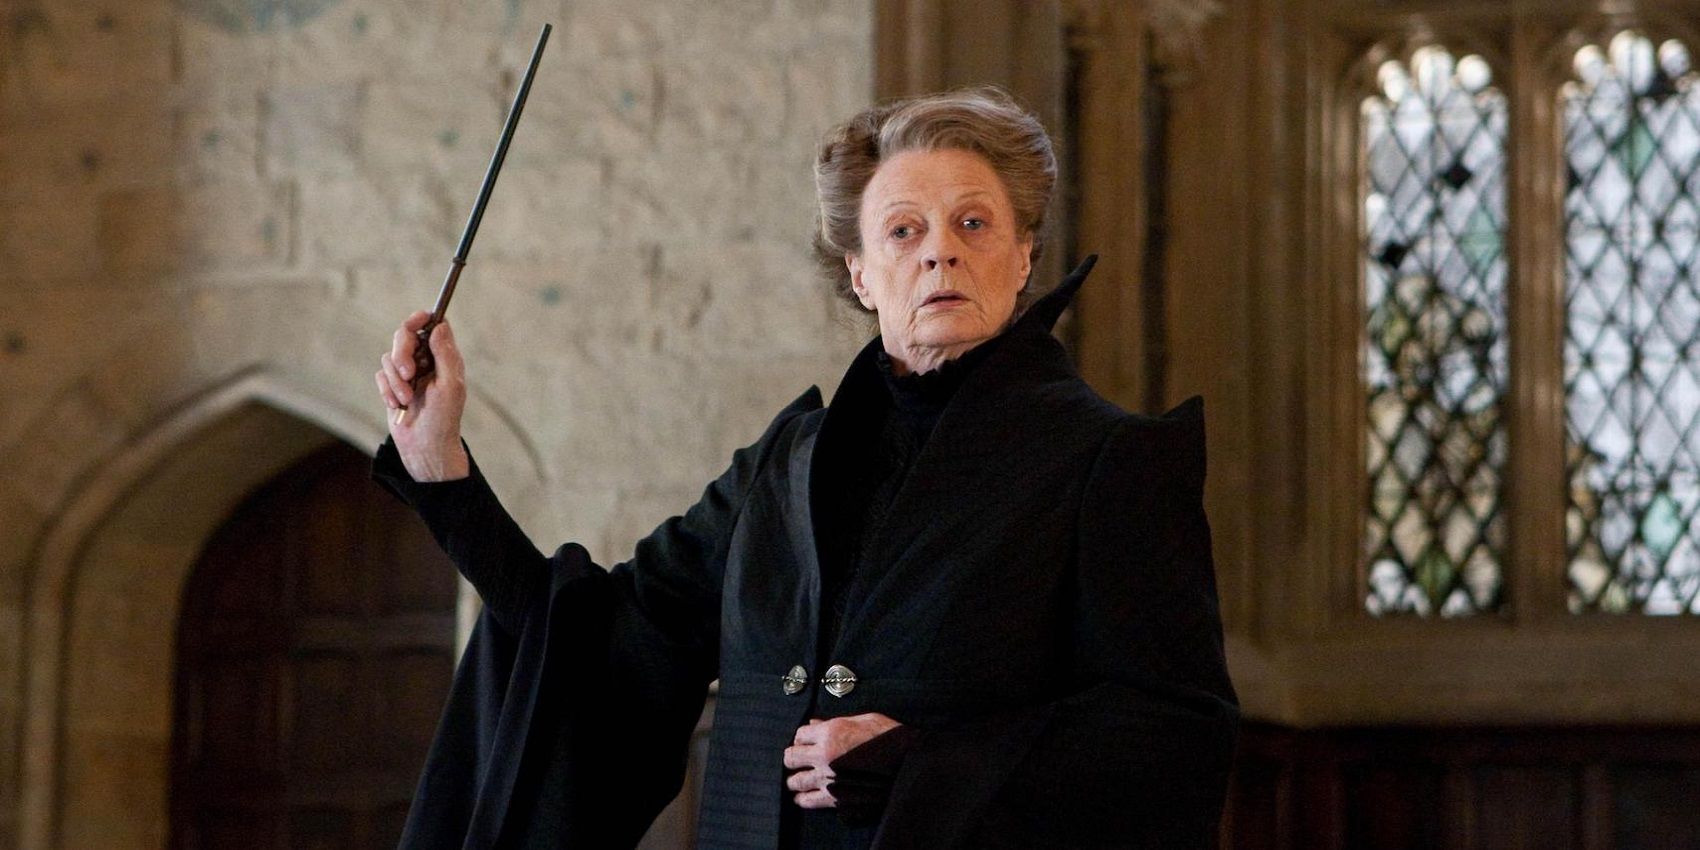 Professor McGonnagall waving her wand in Harry Potter